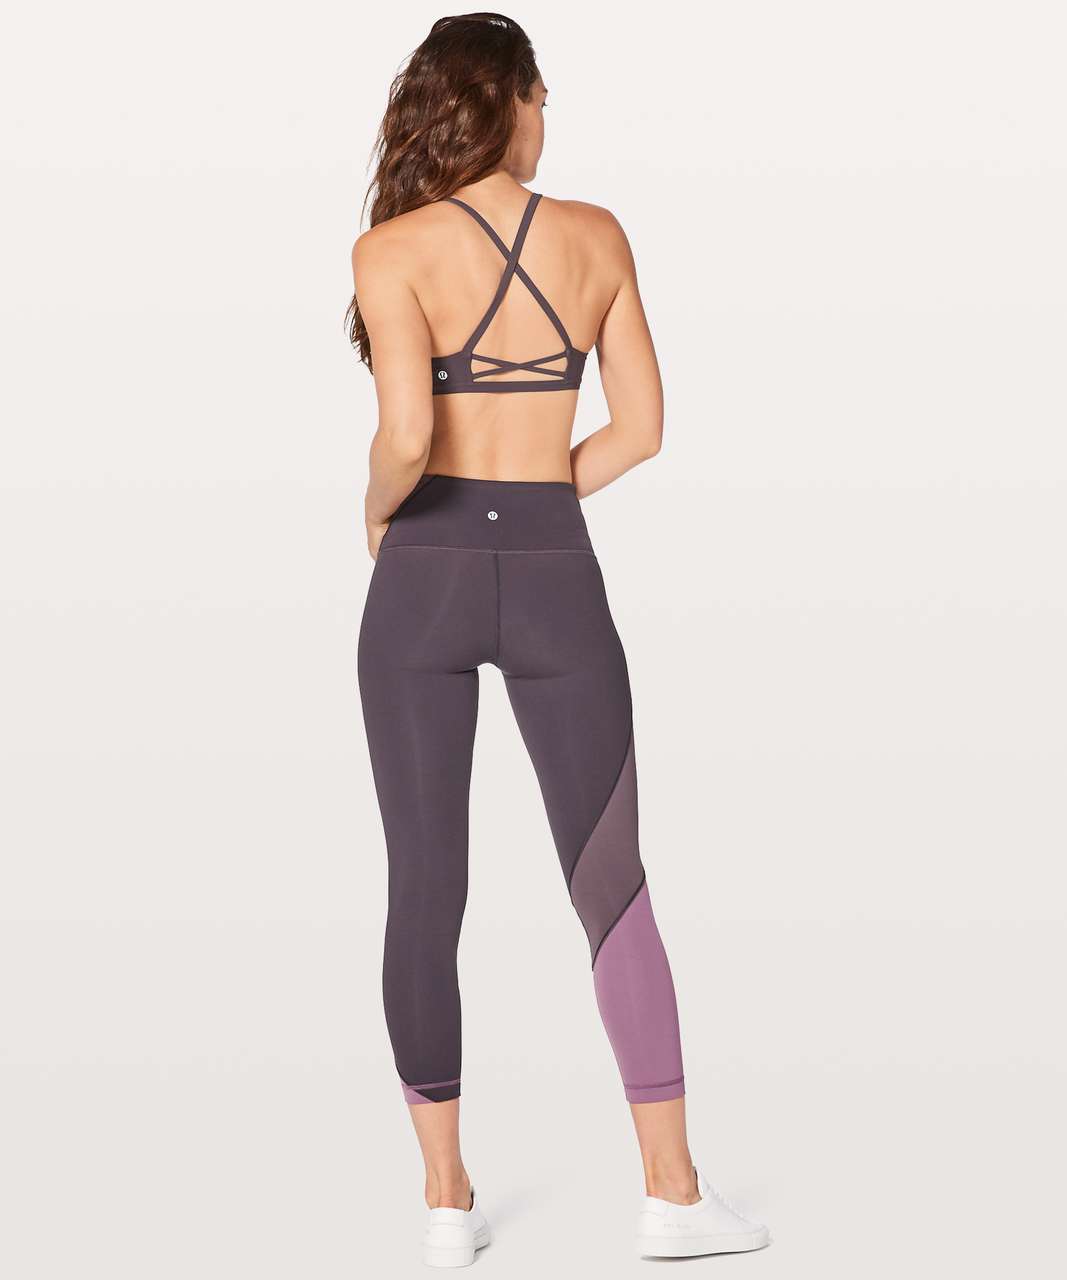 Lululemon Laced With Intent Bra Black Currant, Size 6, Women's